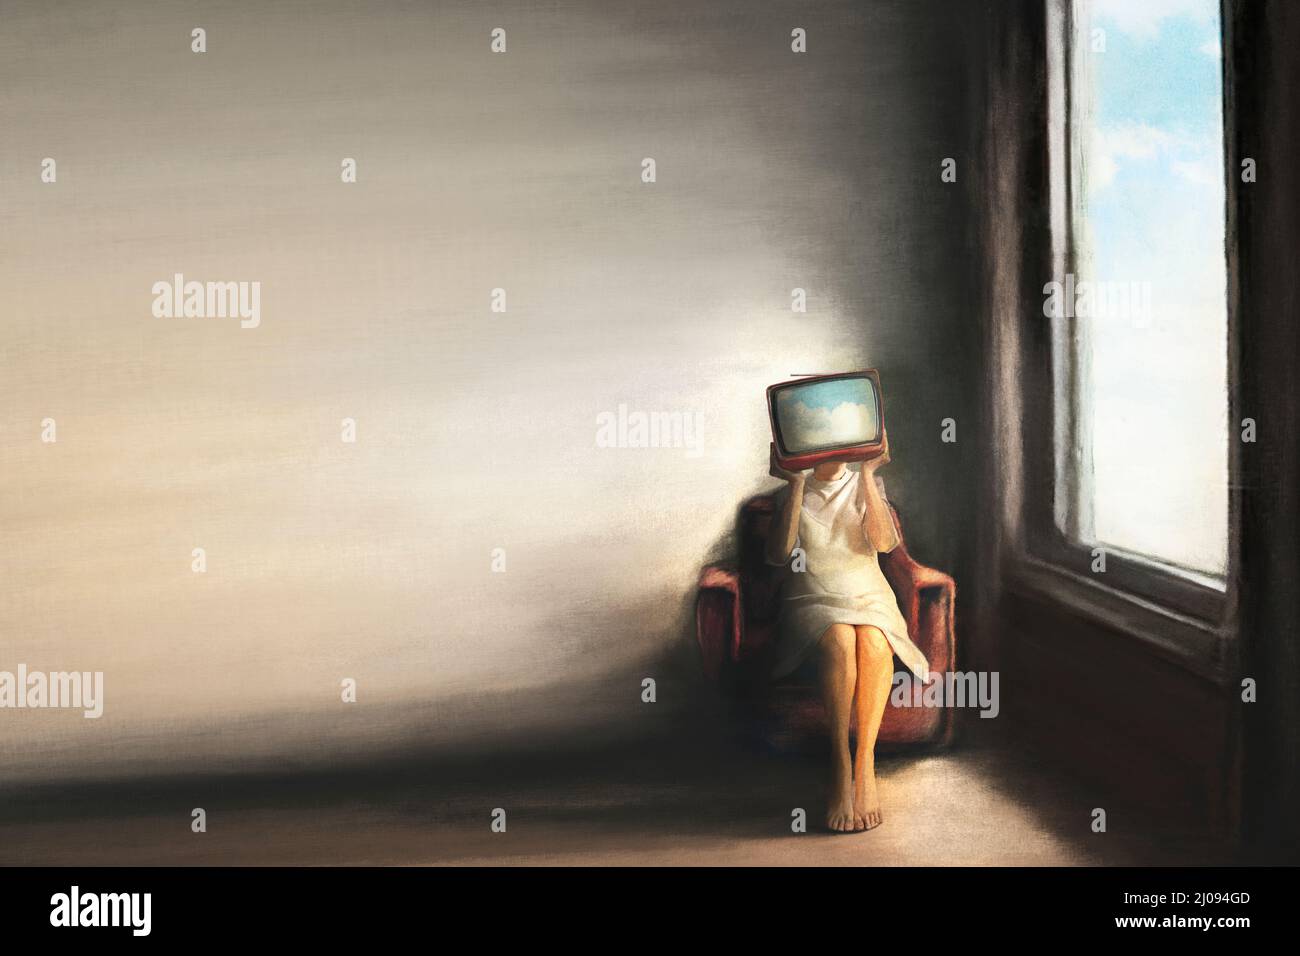 surreal illustration of a woman with her head hidden by a tv projecting a sky Stock Photo